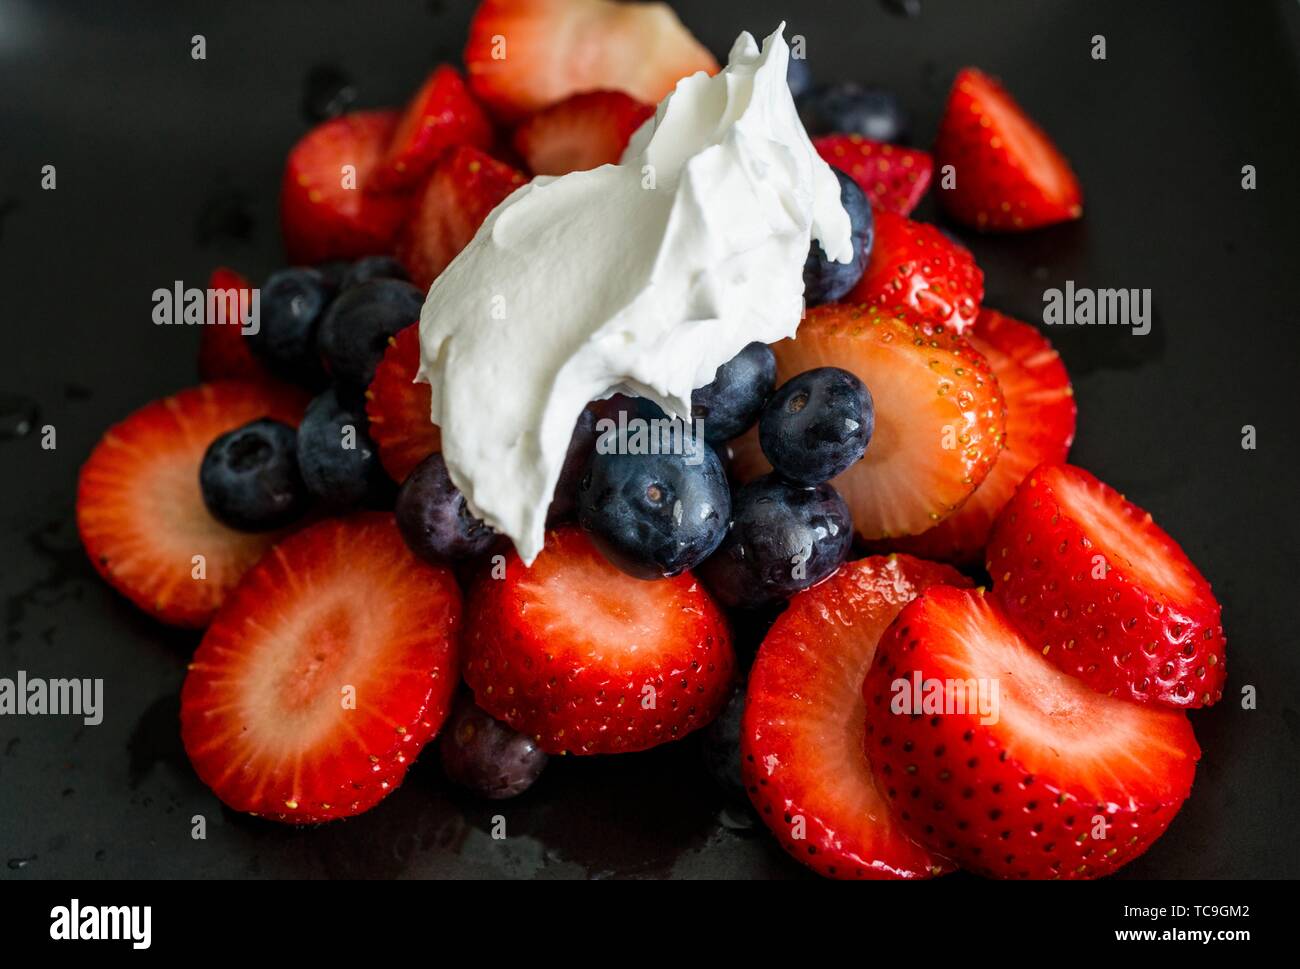 Strawberry slices with blueberries topped with dollop of whipped cream. Macro image against black background. Stock Photo